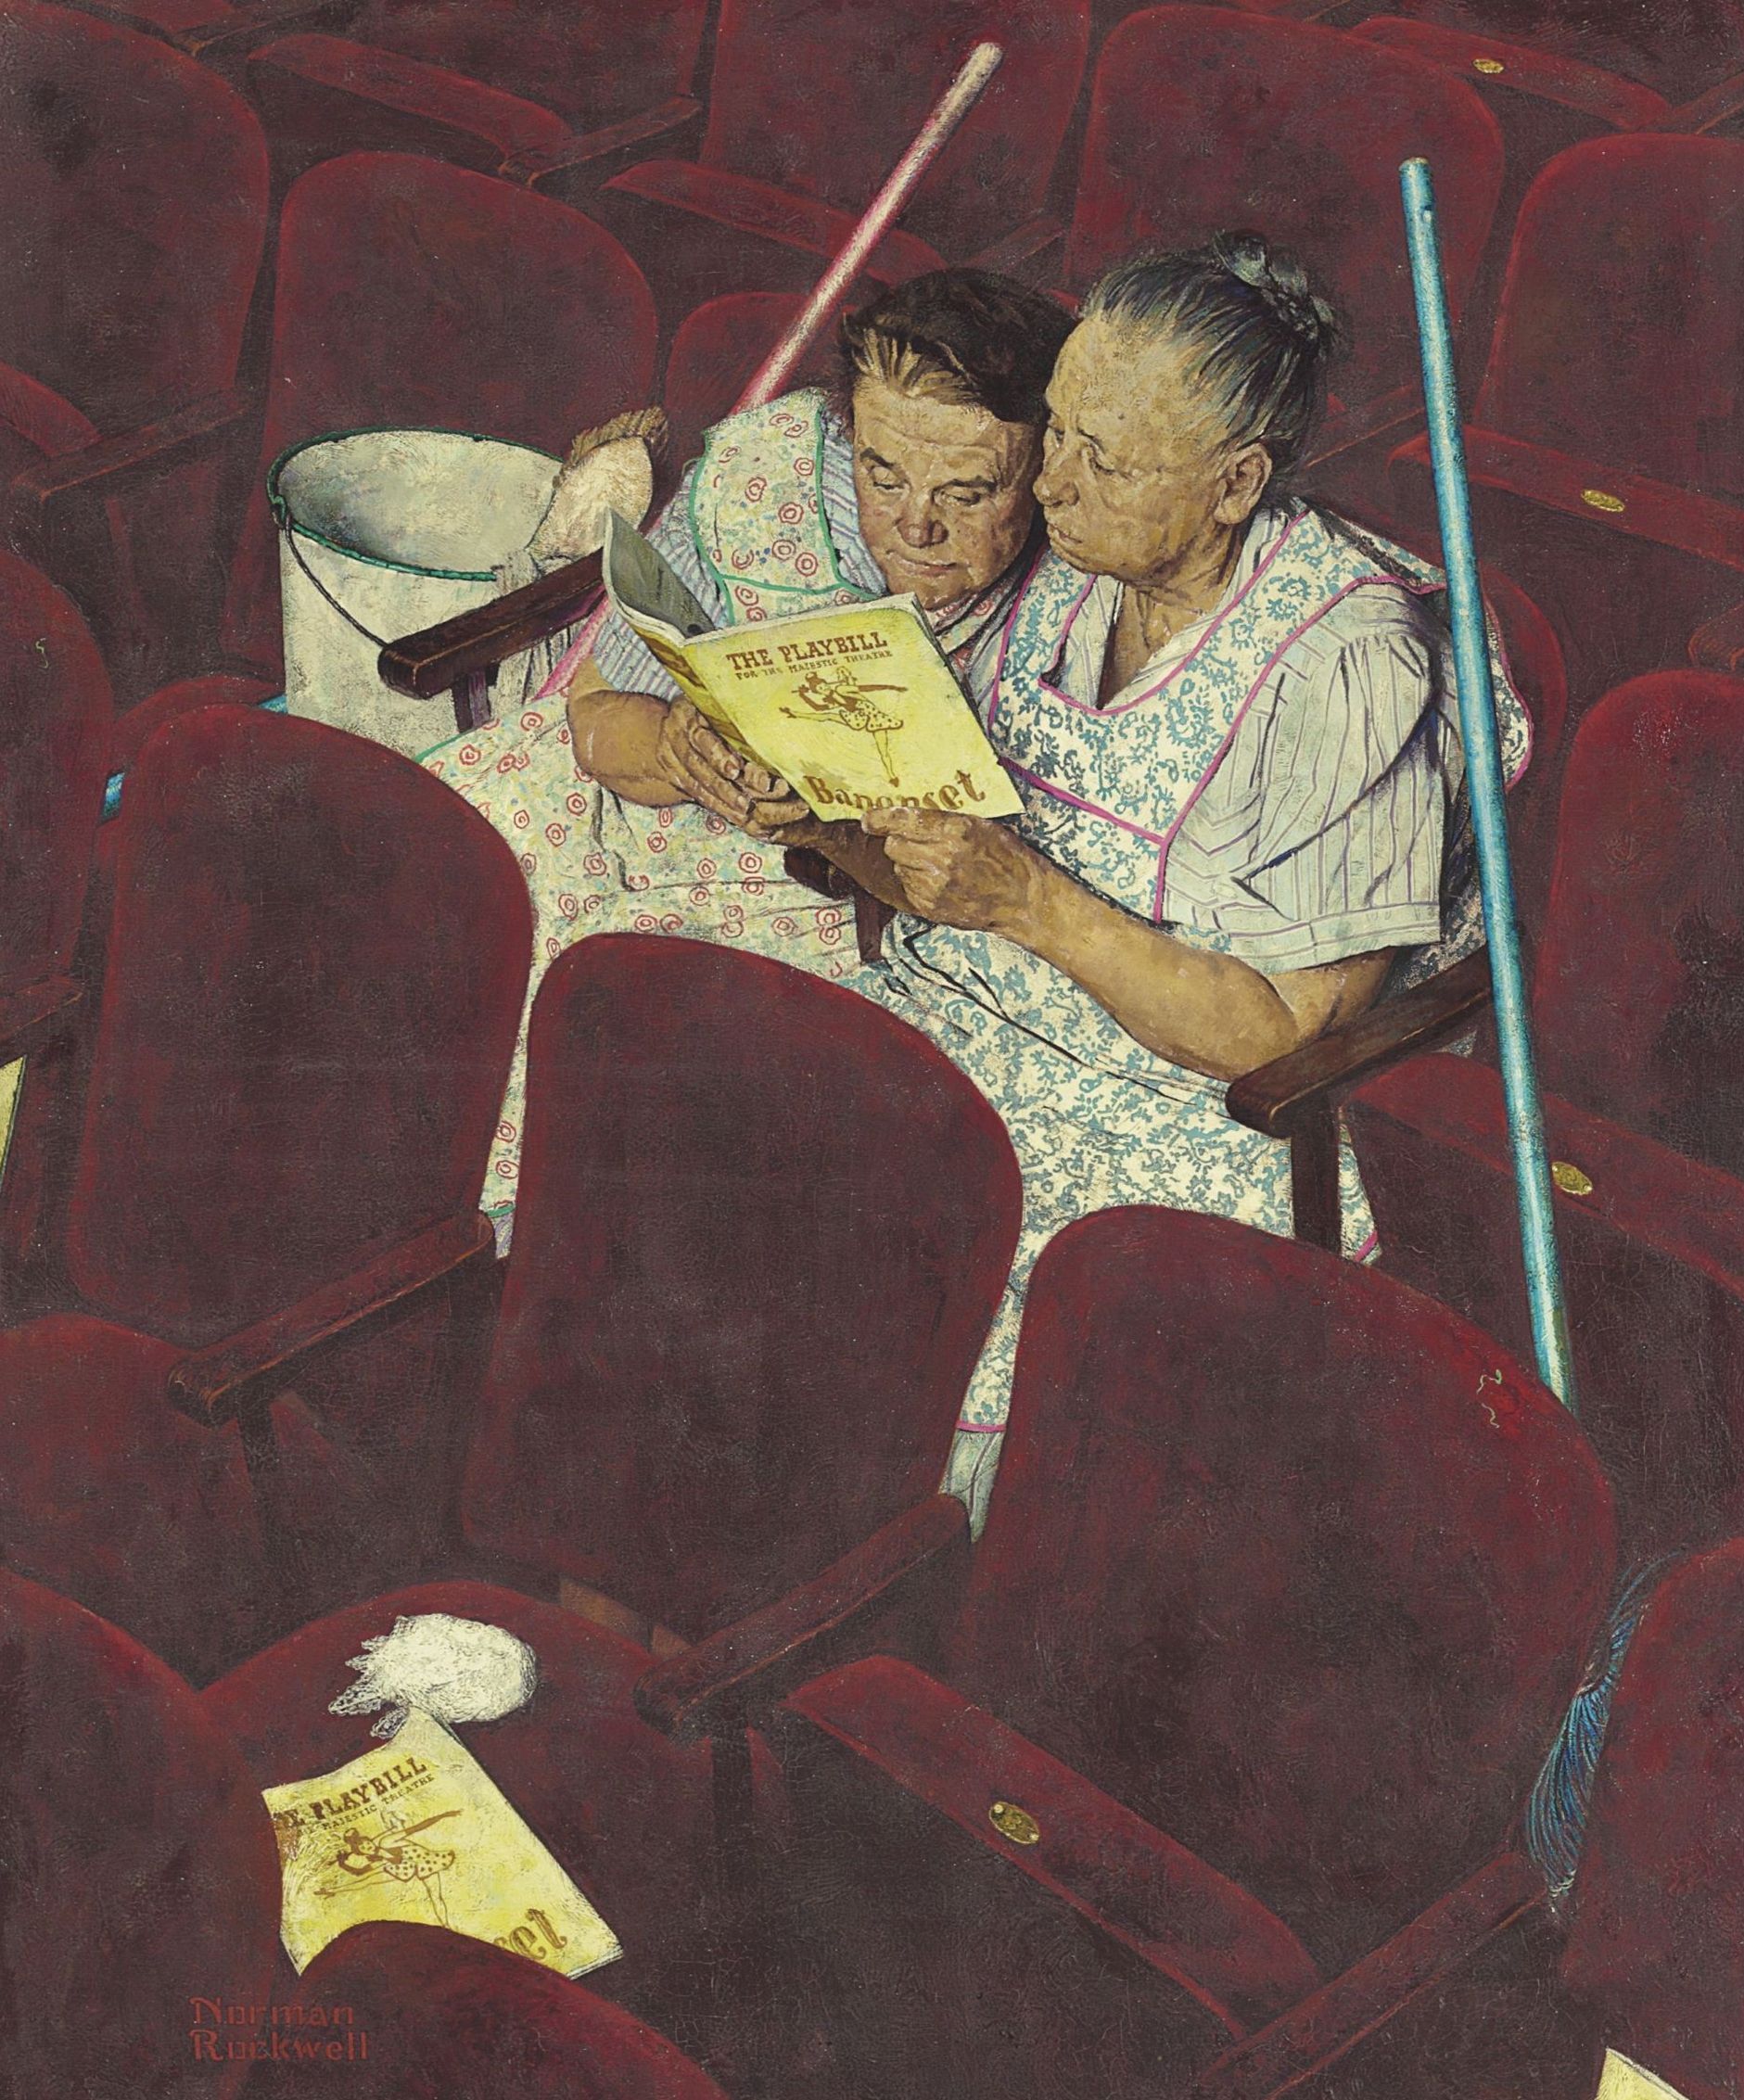 Norman Rockwell Charwomen in Theater (1946), dettaglio. ©SEPS_Curtis Publishing, Indianapolis, IN